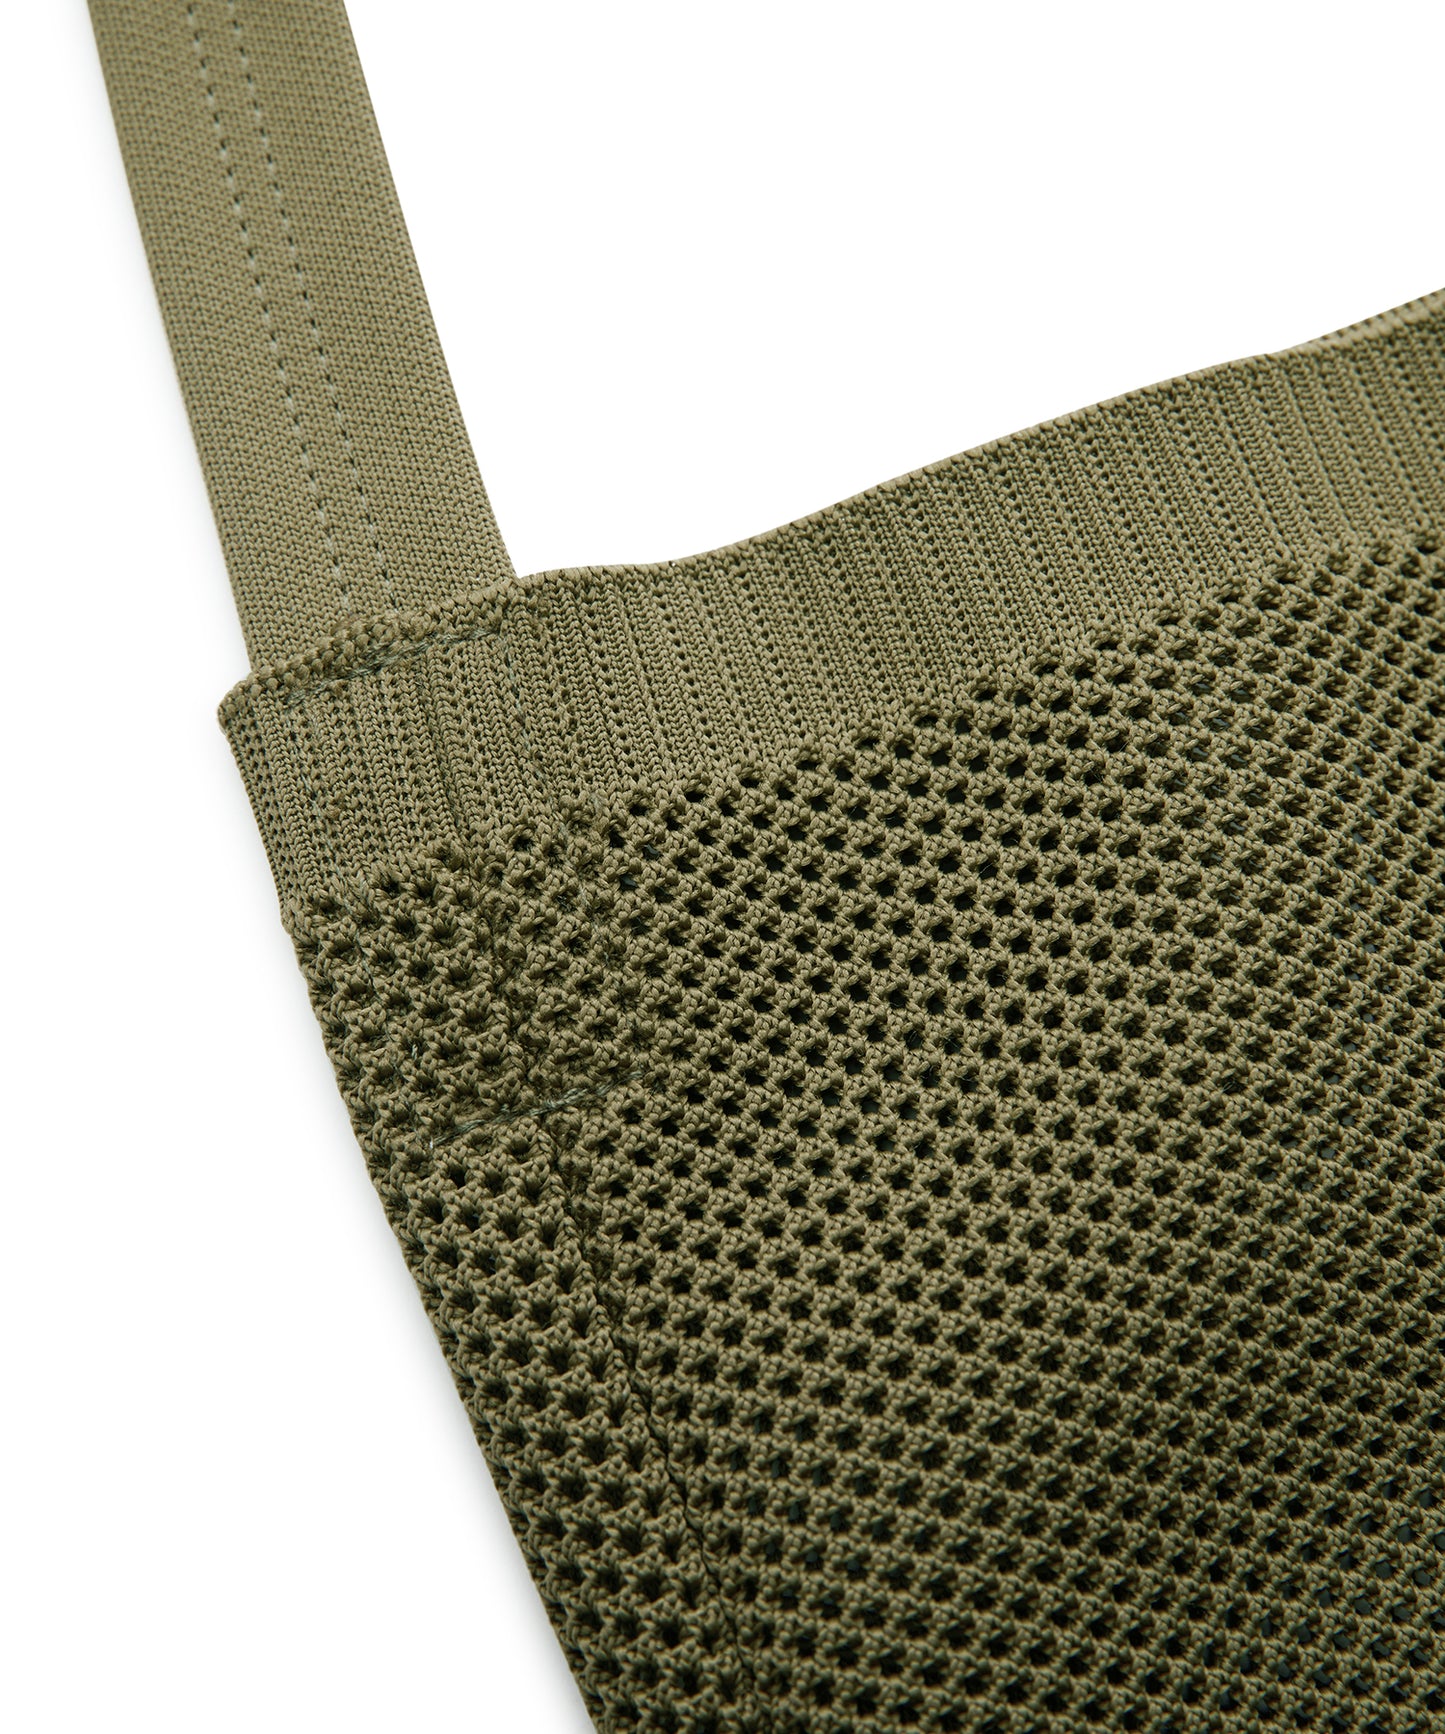 Structured Knit Mesh Tote Bag